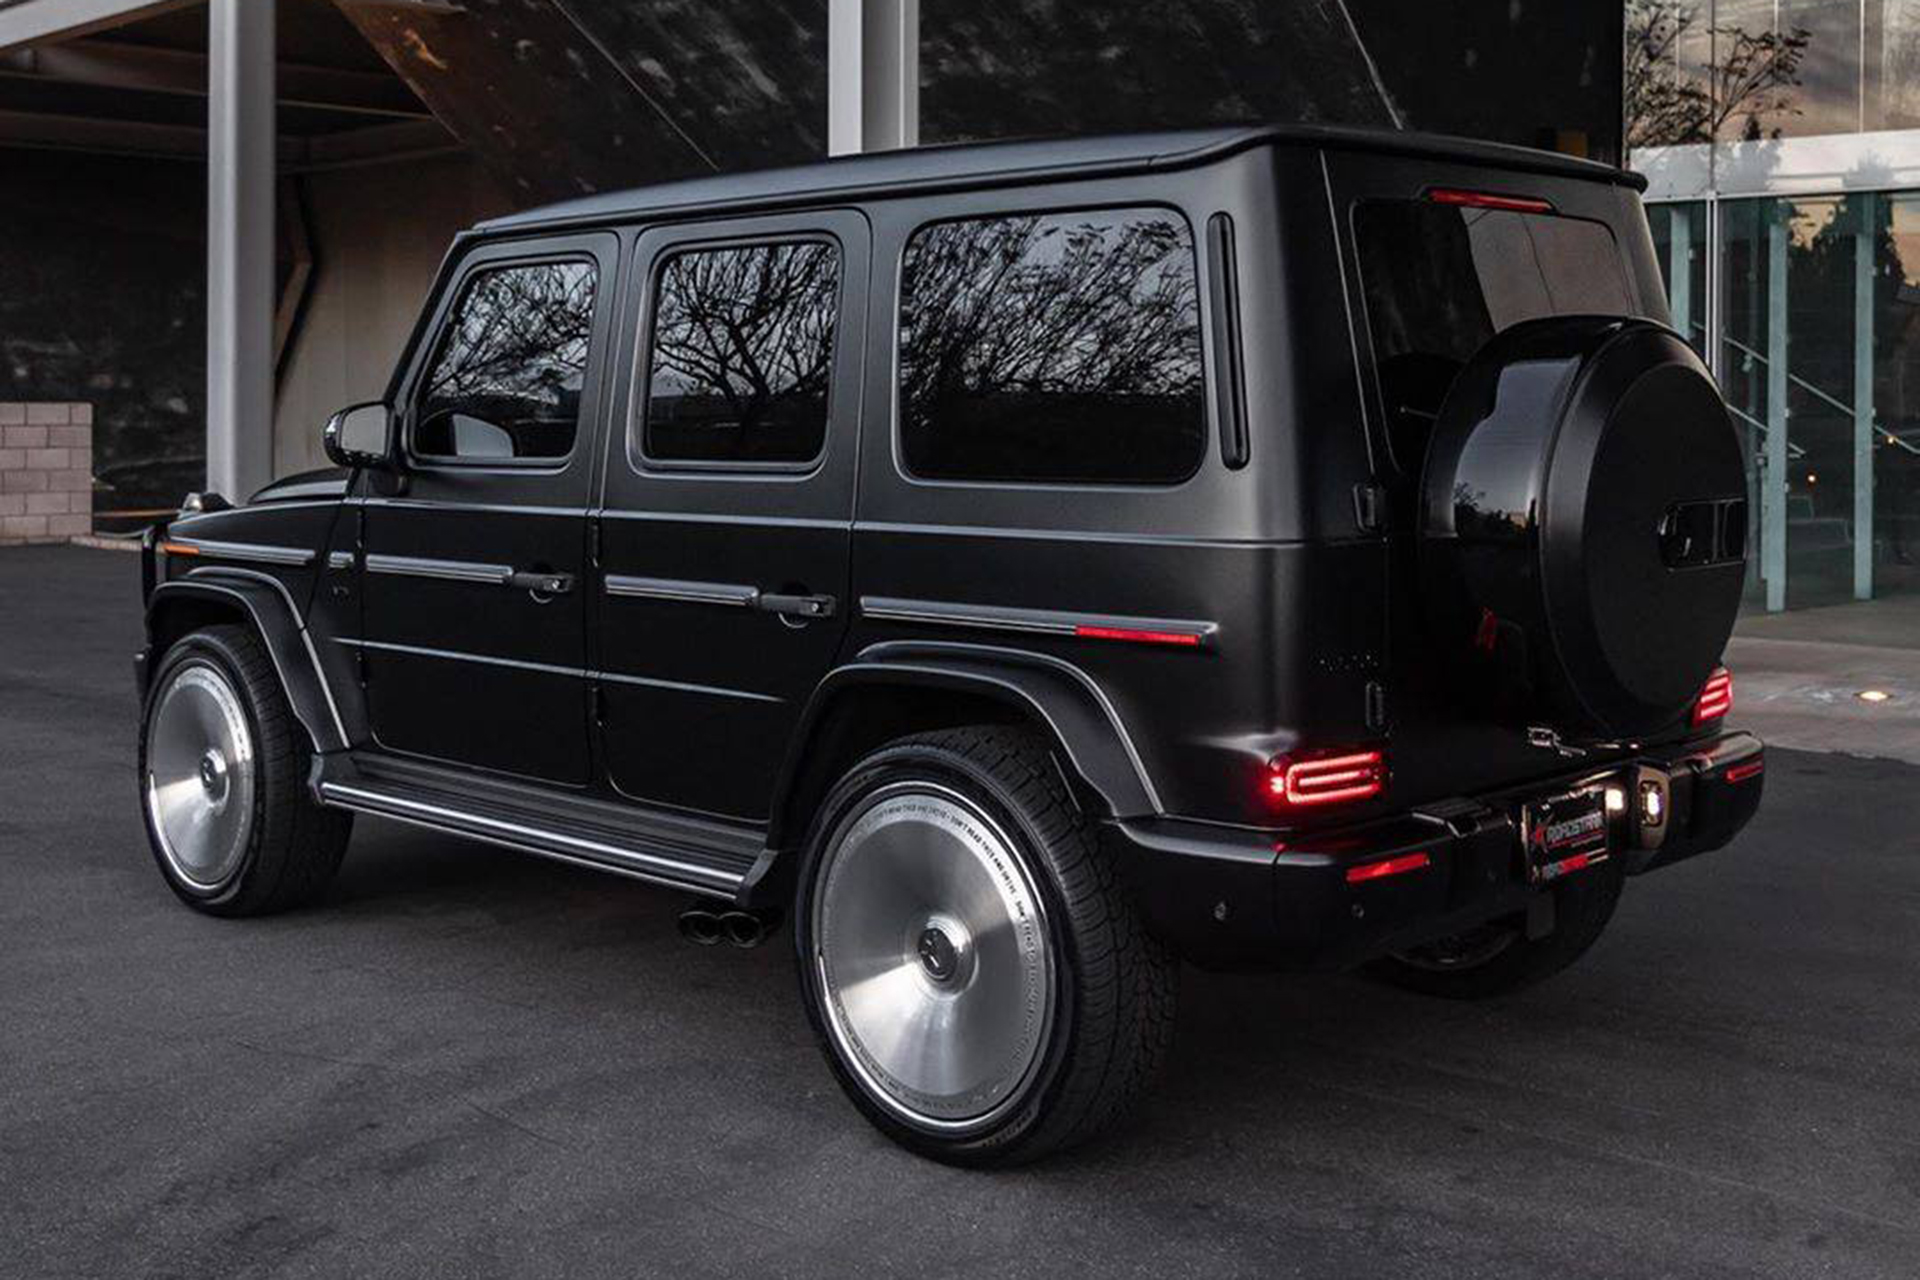 Mercedes Benz G Wagon Tries On Dish Wheels What Do You Think Carscoops